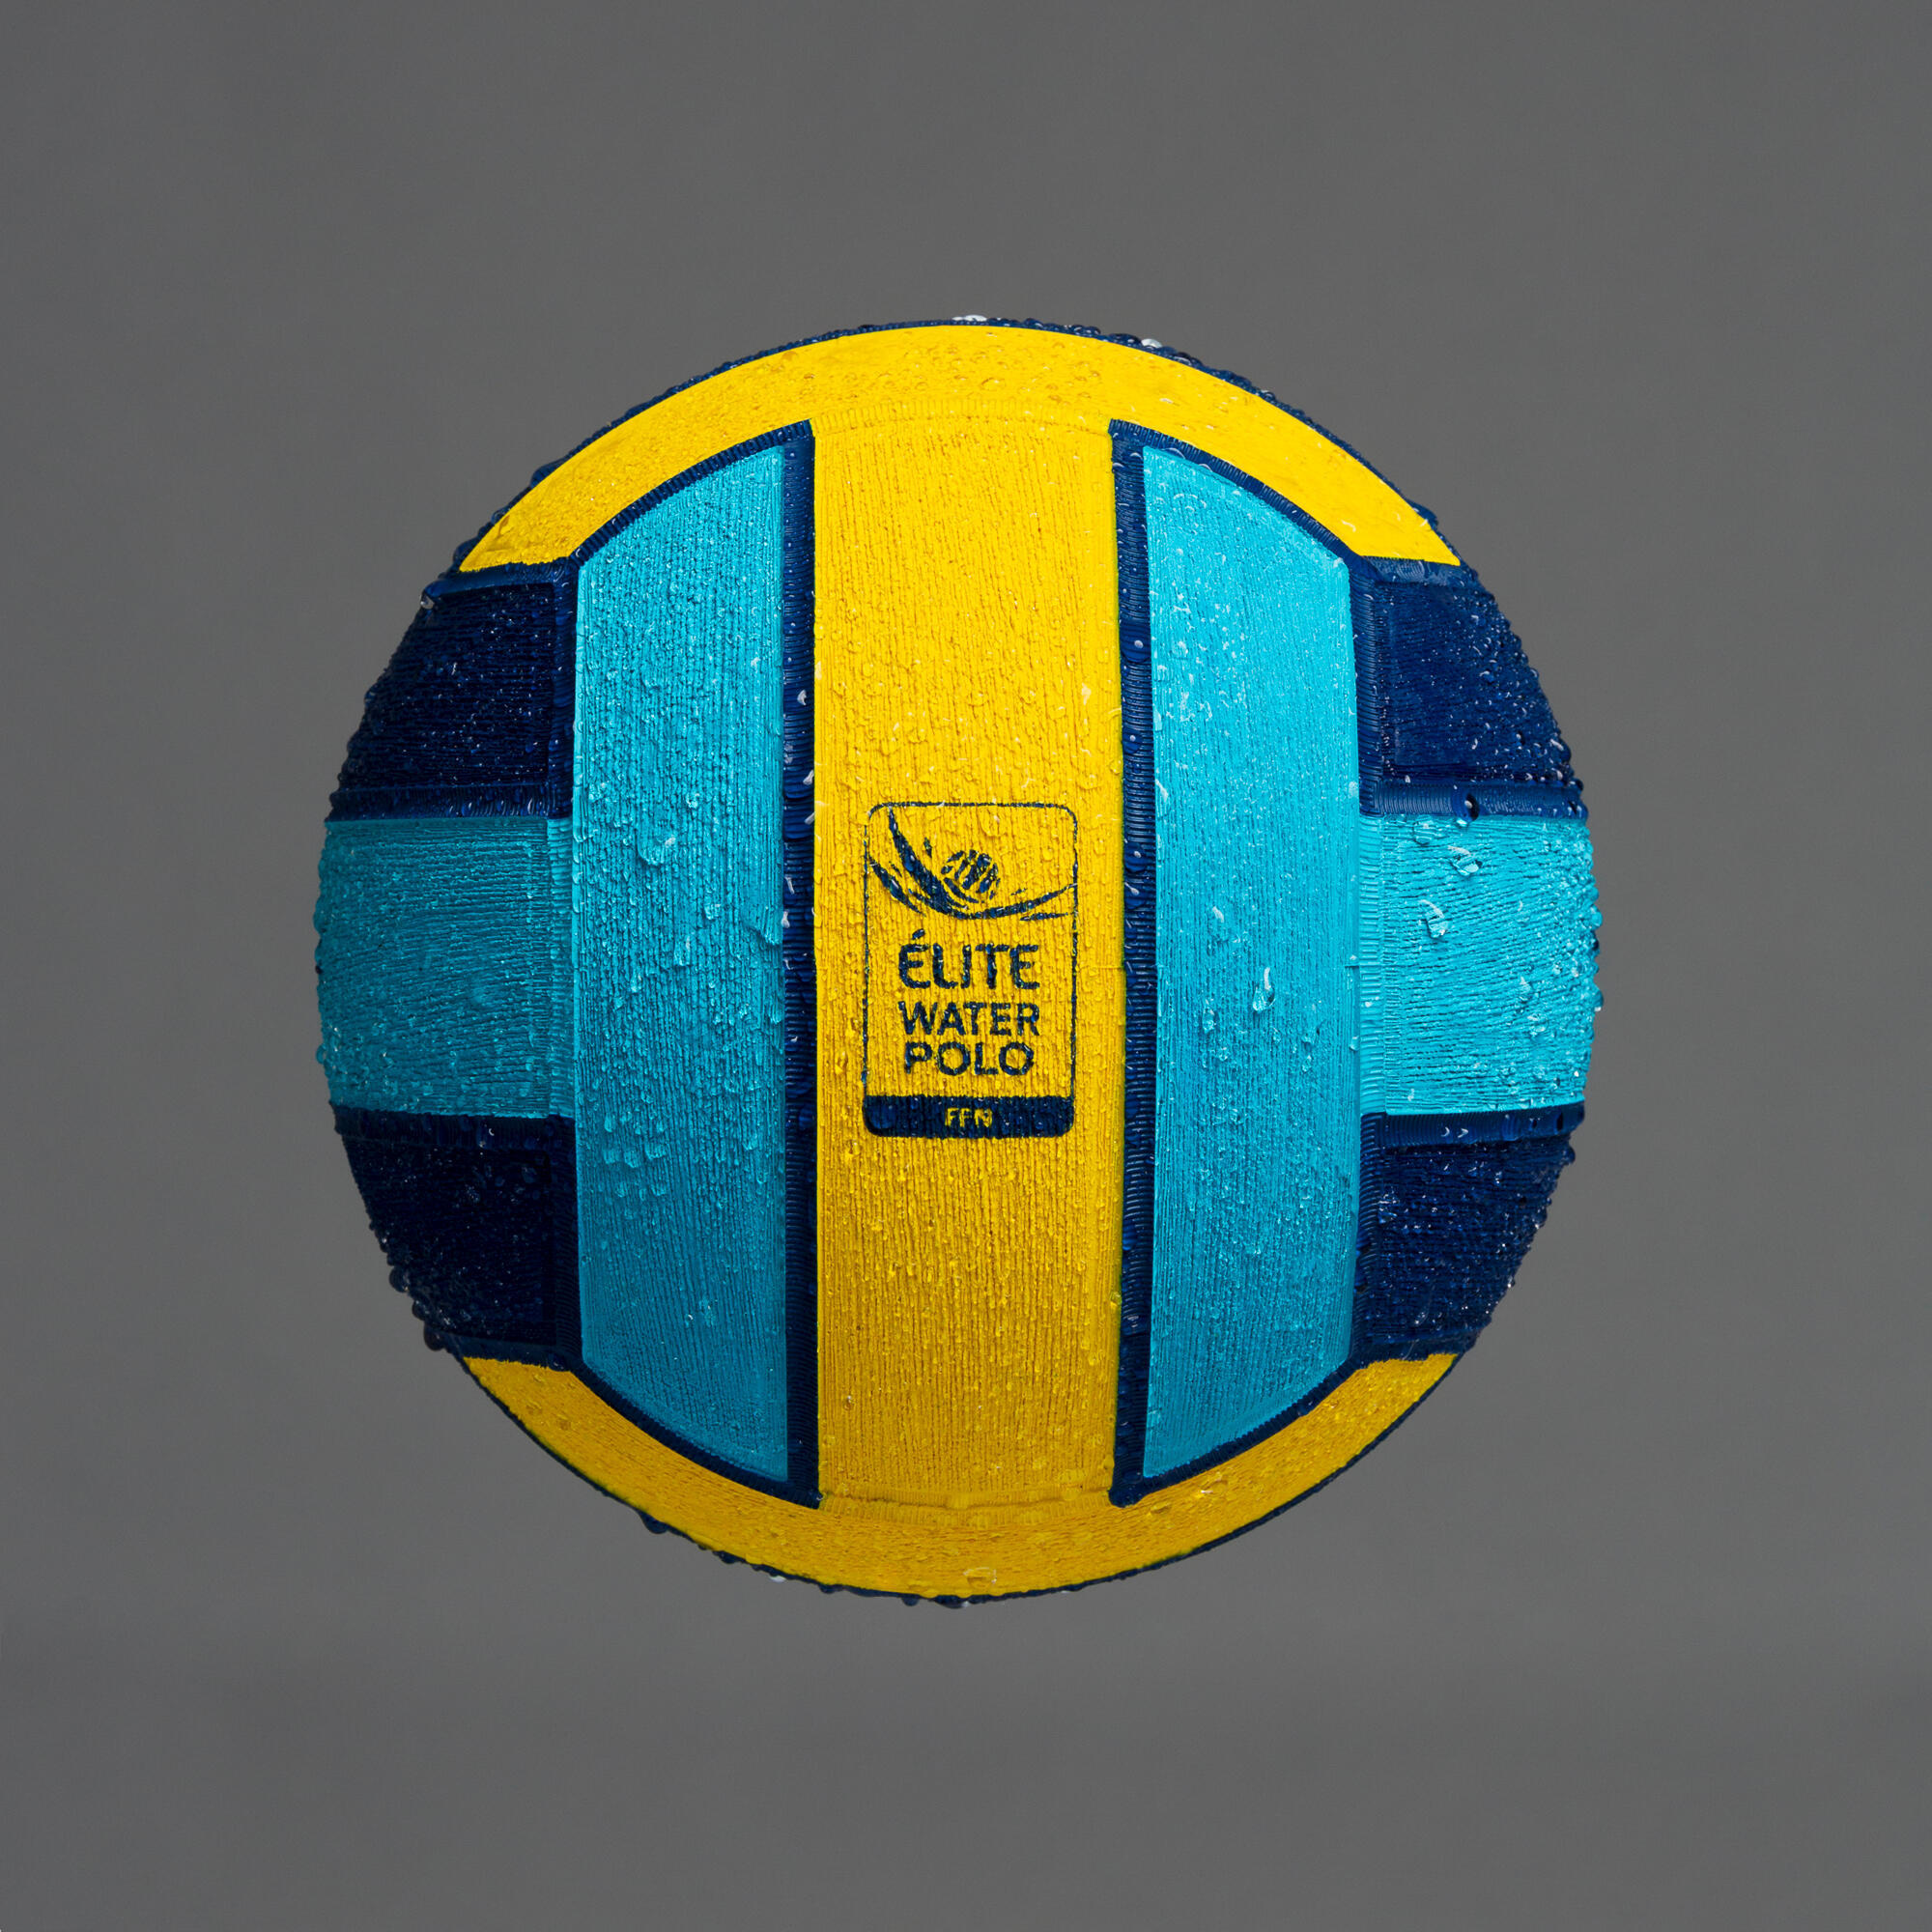 WATER POLO BALL WP900 SIZE 4 3/5